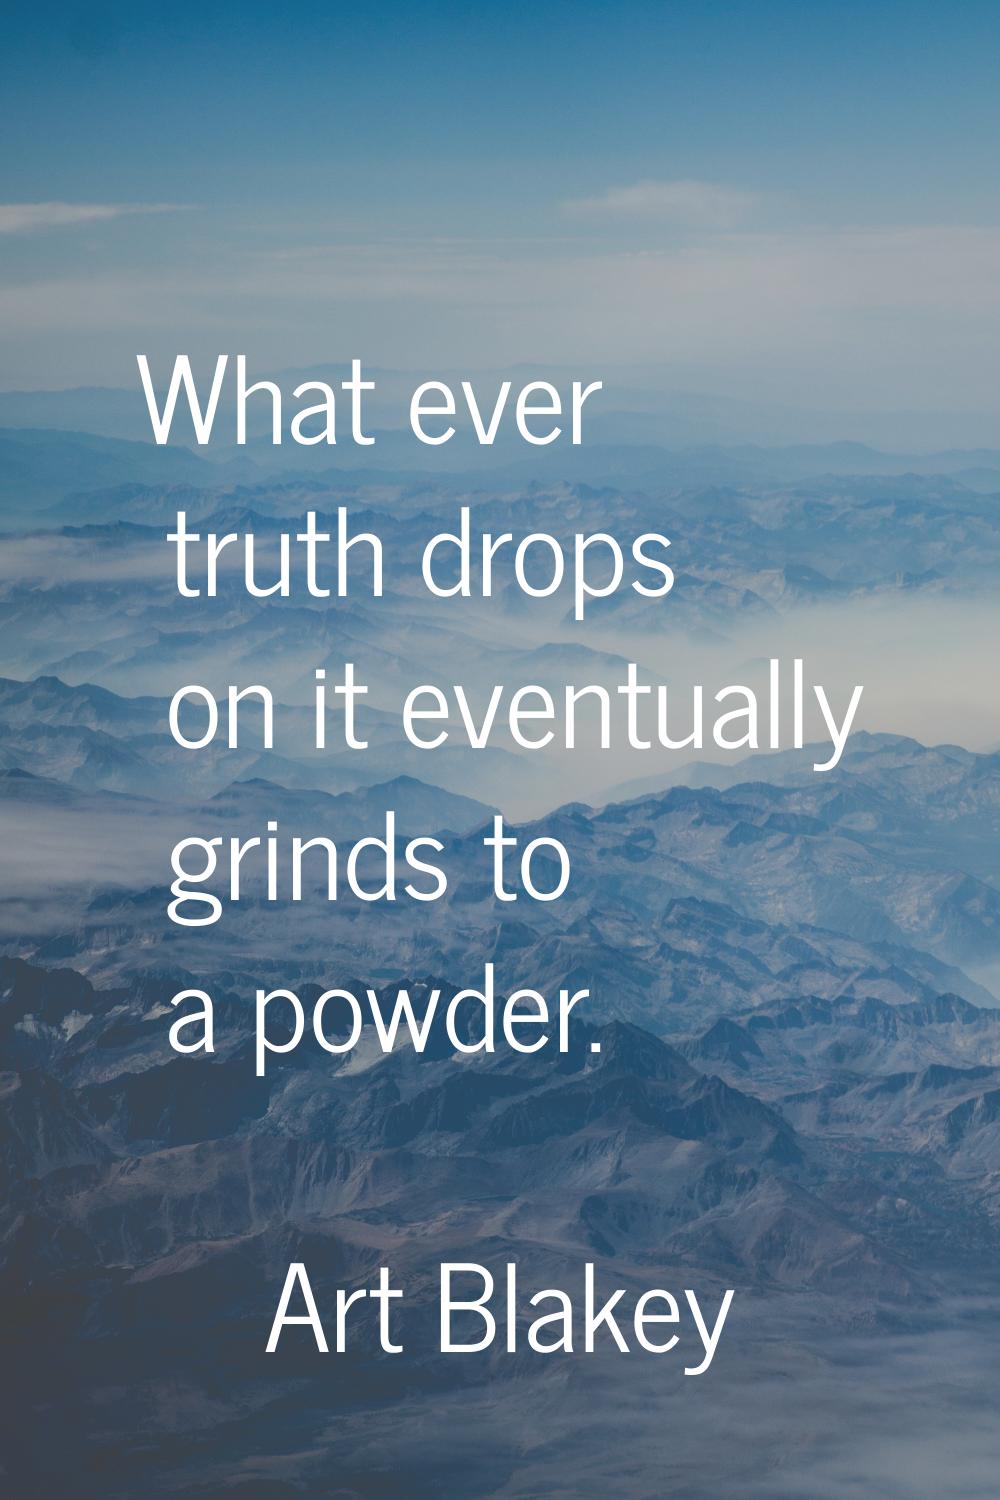 What ever truth drops on it eventually grinds to a powder.